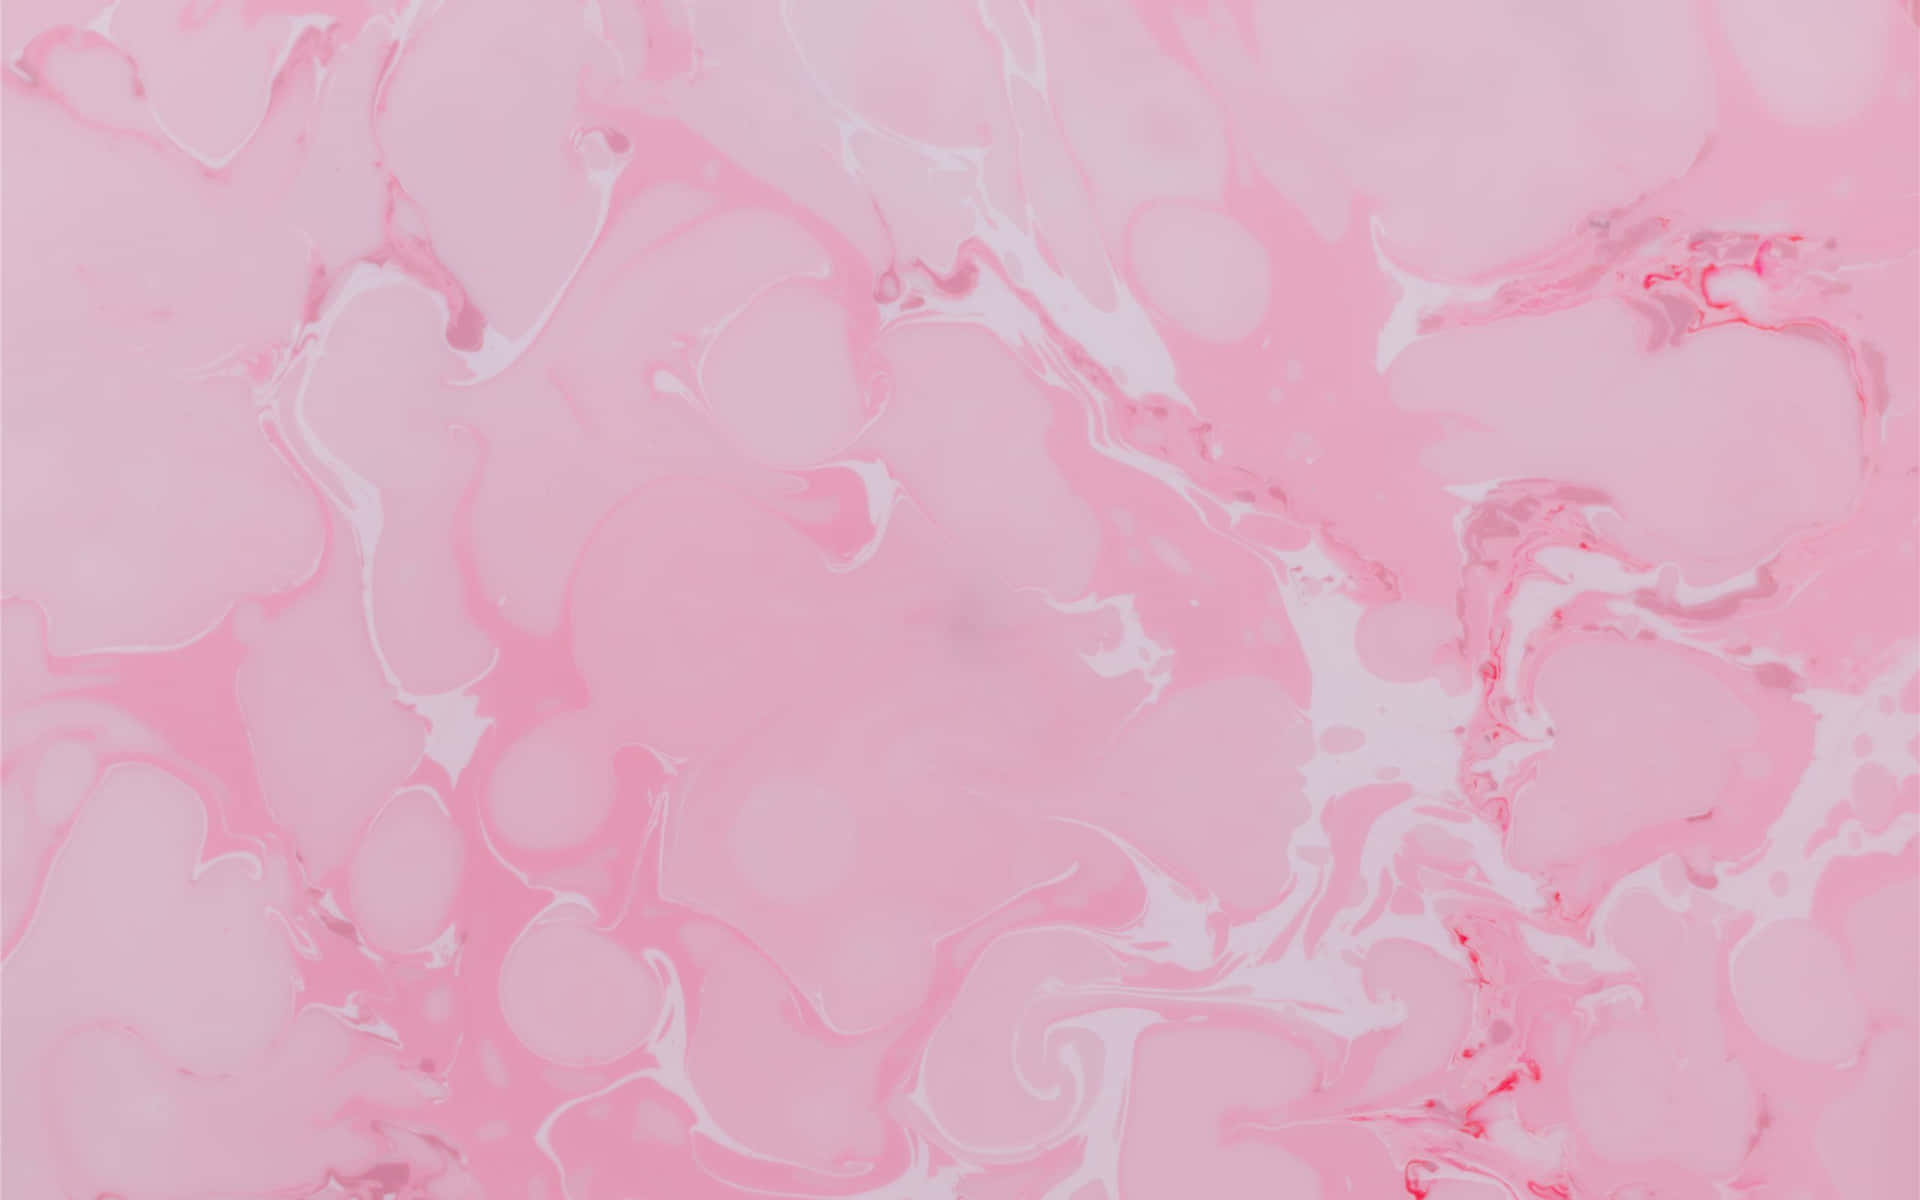 White and pink abstract background